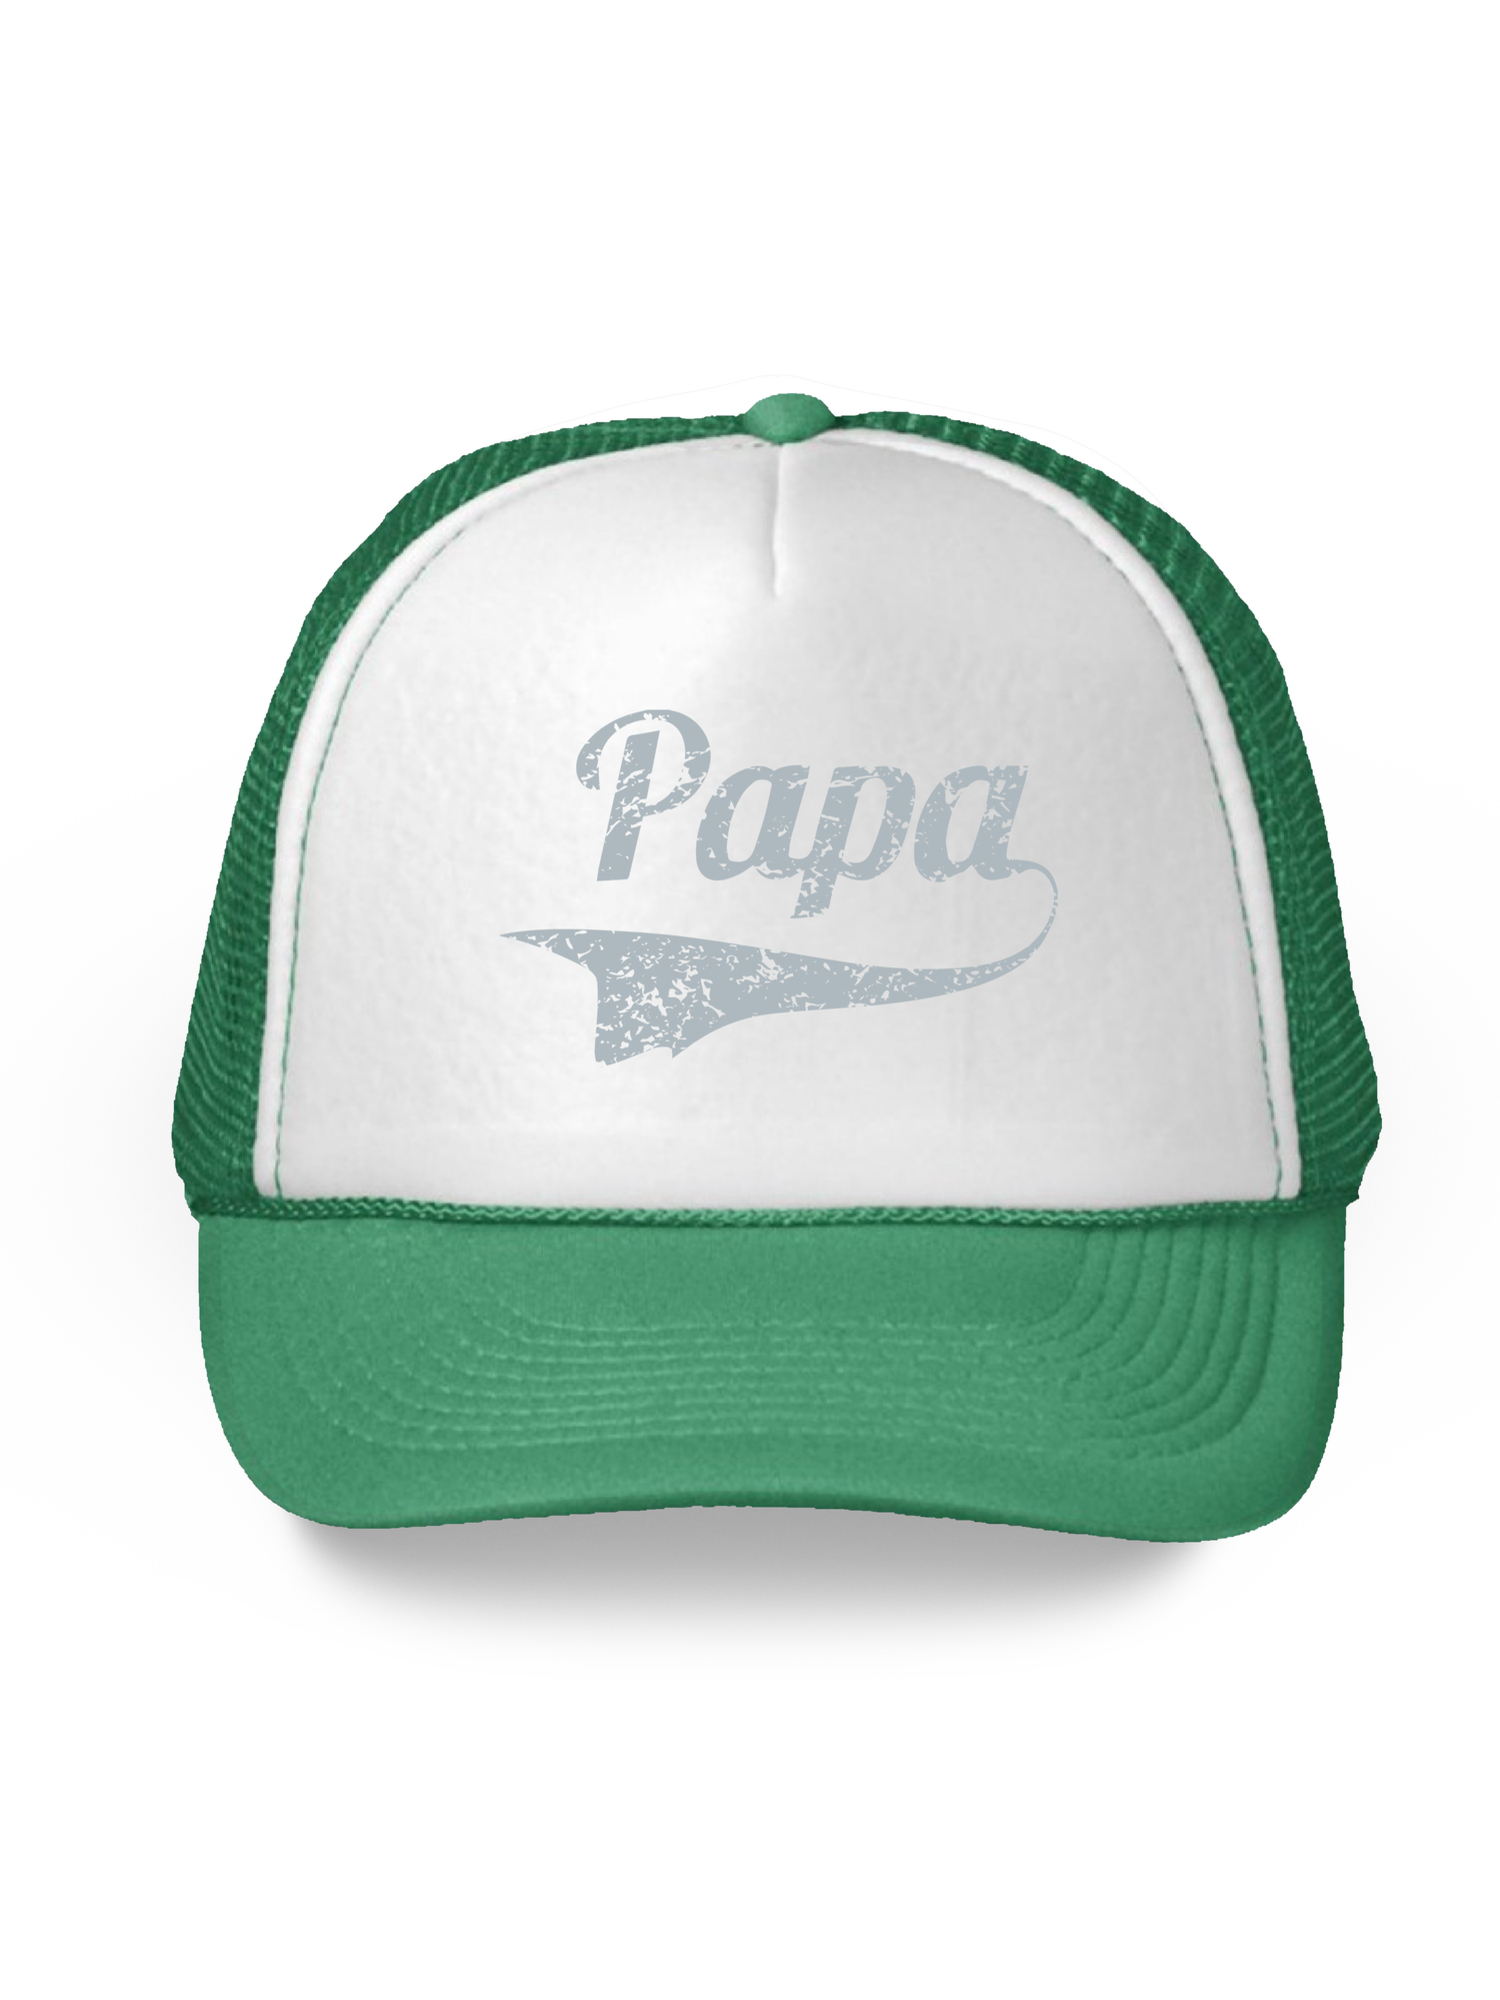 Awkward Styles Papa Trucker Hat Father's Day Gifts for Men Dad Hats Dad 2018 Trucker Hat Funny Gifts for Dad Hat Accessories for Men Father Trucker Hat Daddy 2018 Snapback Hat Dad Hats with Sayings - image 1 of 6